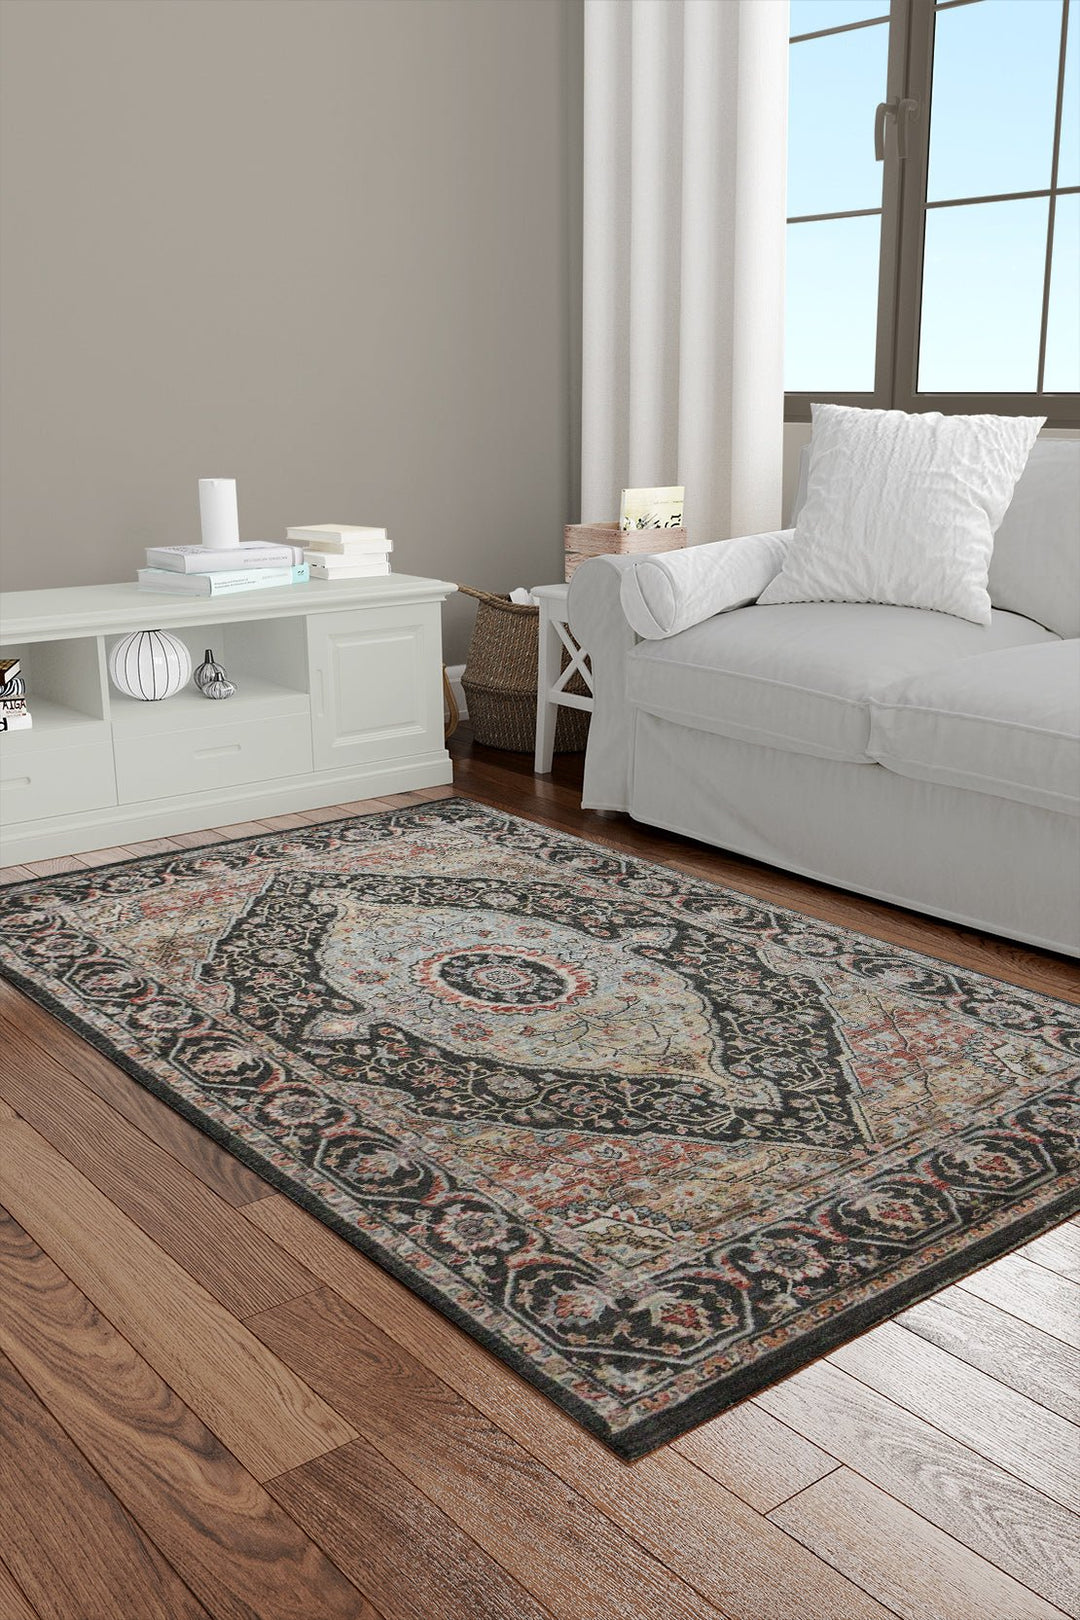 Premium Quality Turkish Antia Rug - 3.9 x 5.9 FT - Gray - Resilient Construction for Long-Lasting Use - V Surfaces